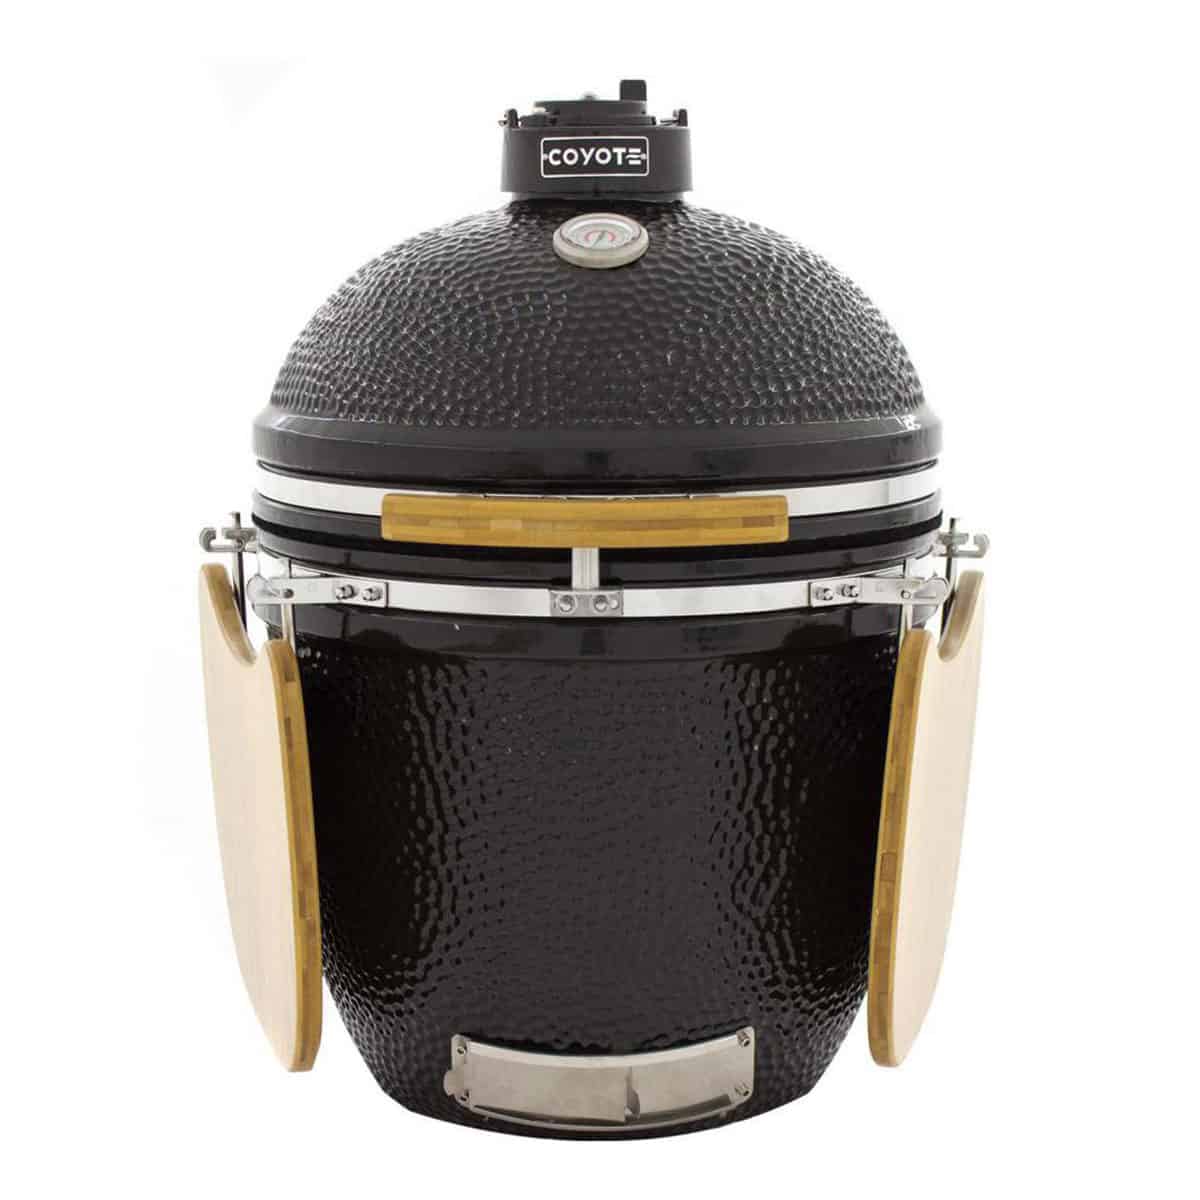 Coyote Asado Ceramic Grill and Smoker Front